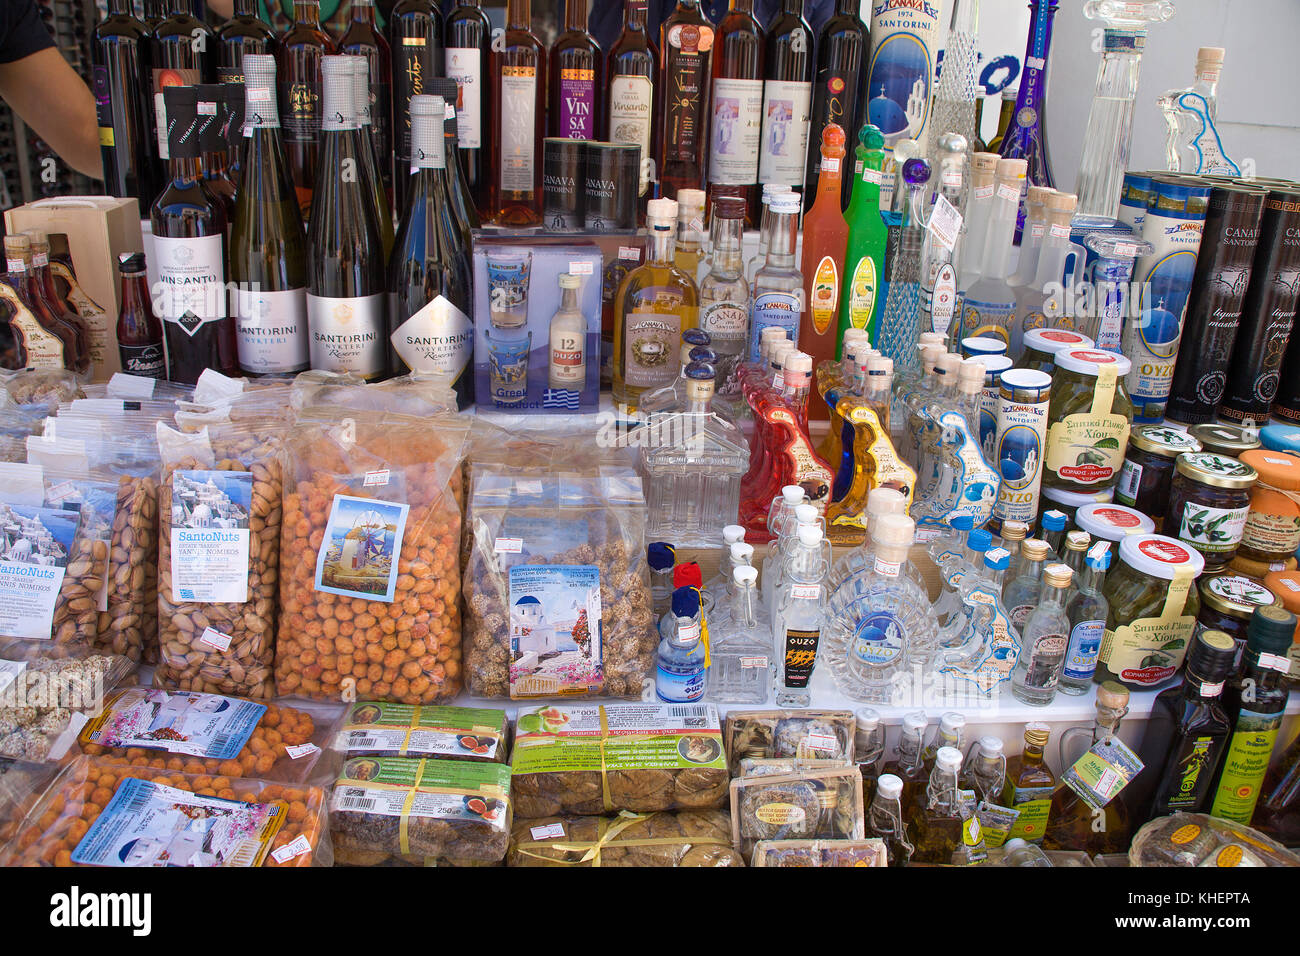 Vinsanto, the famous wine of Santorin and other local specialities, Oia, Santorin island, Cyclades, Aegean, Greece Stock Photo